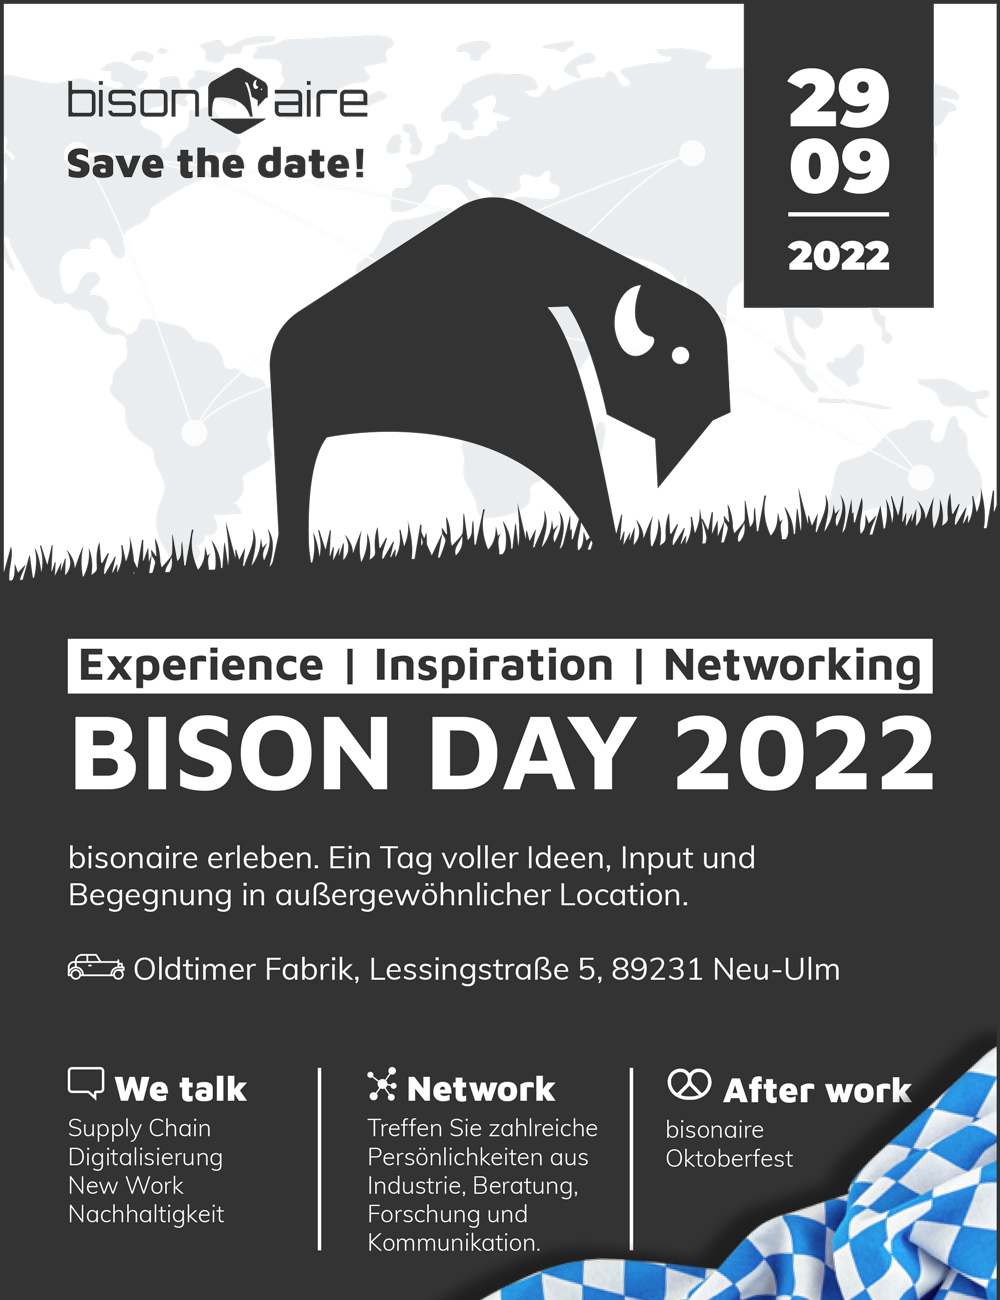 Bison Day 2022